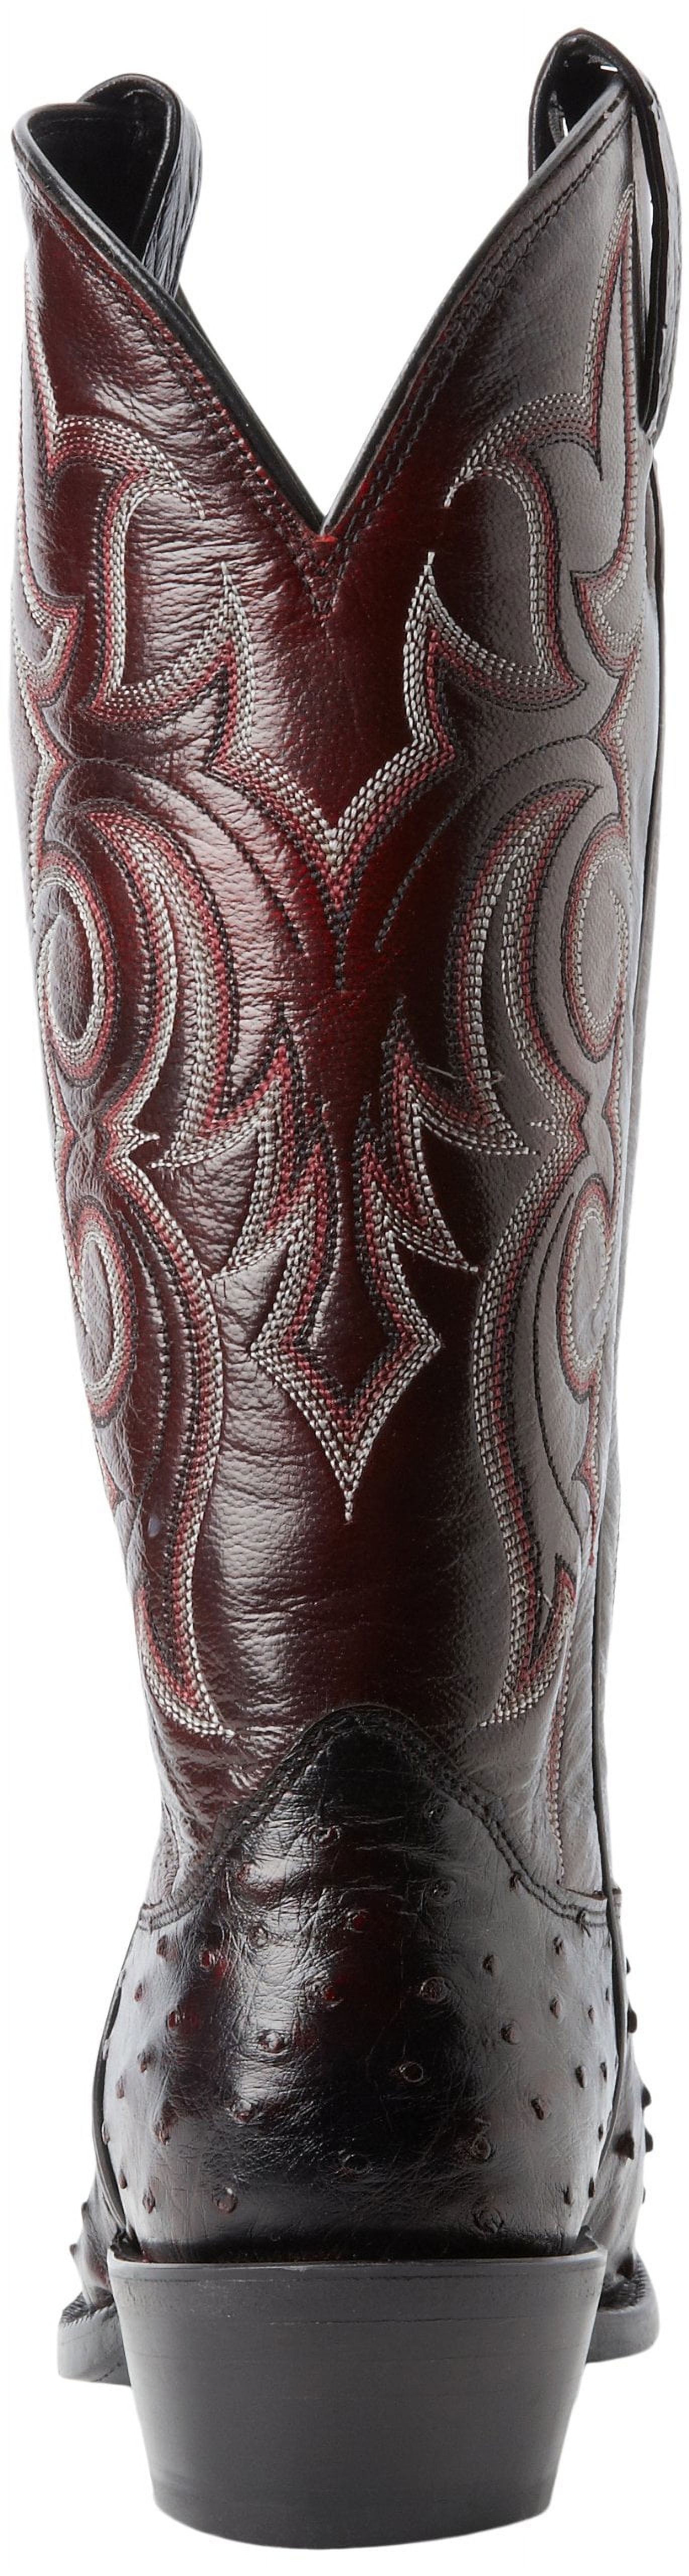 Nocona Boots Men's MD8506 Boot,Black Cherry Full Quill,6 EE US - image 3 of 6